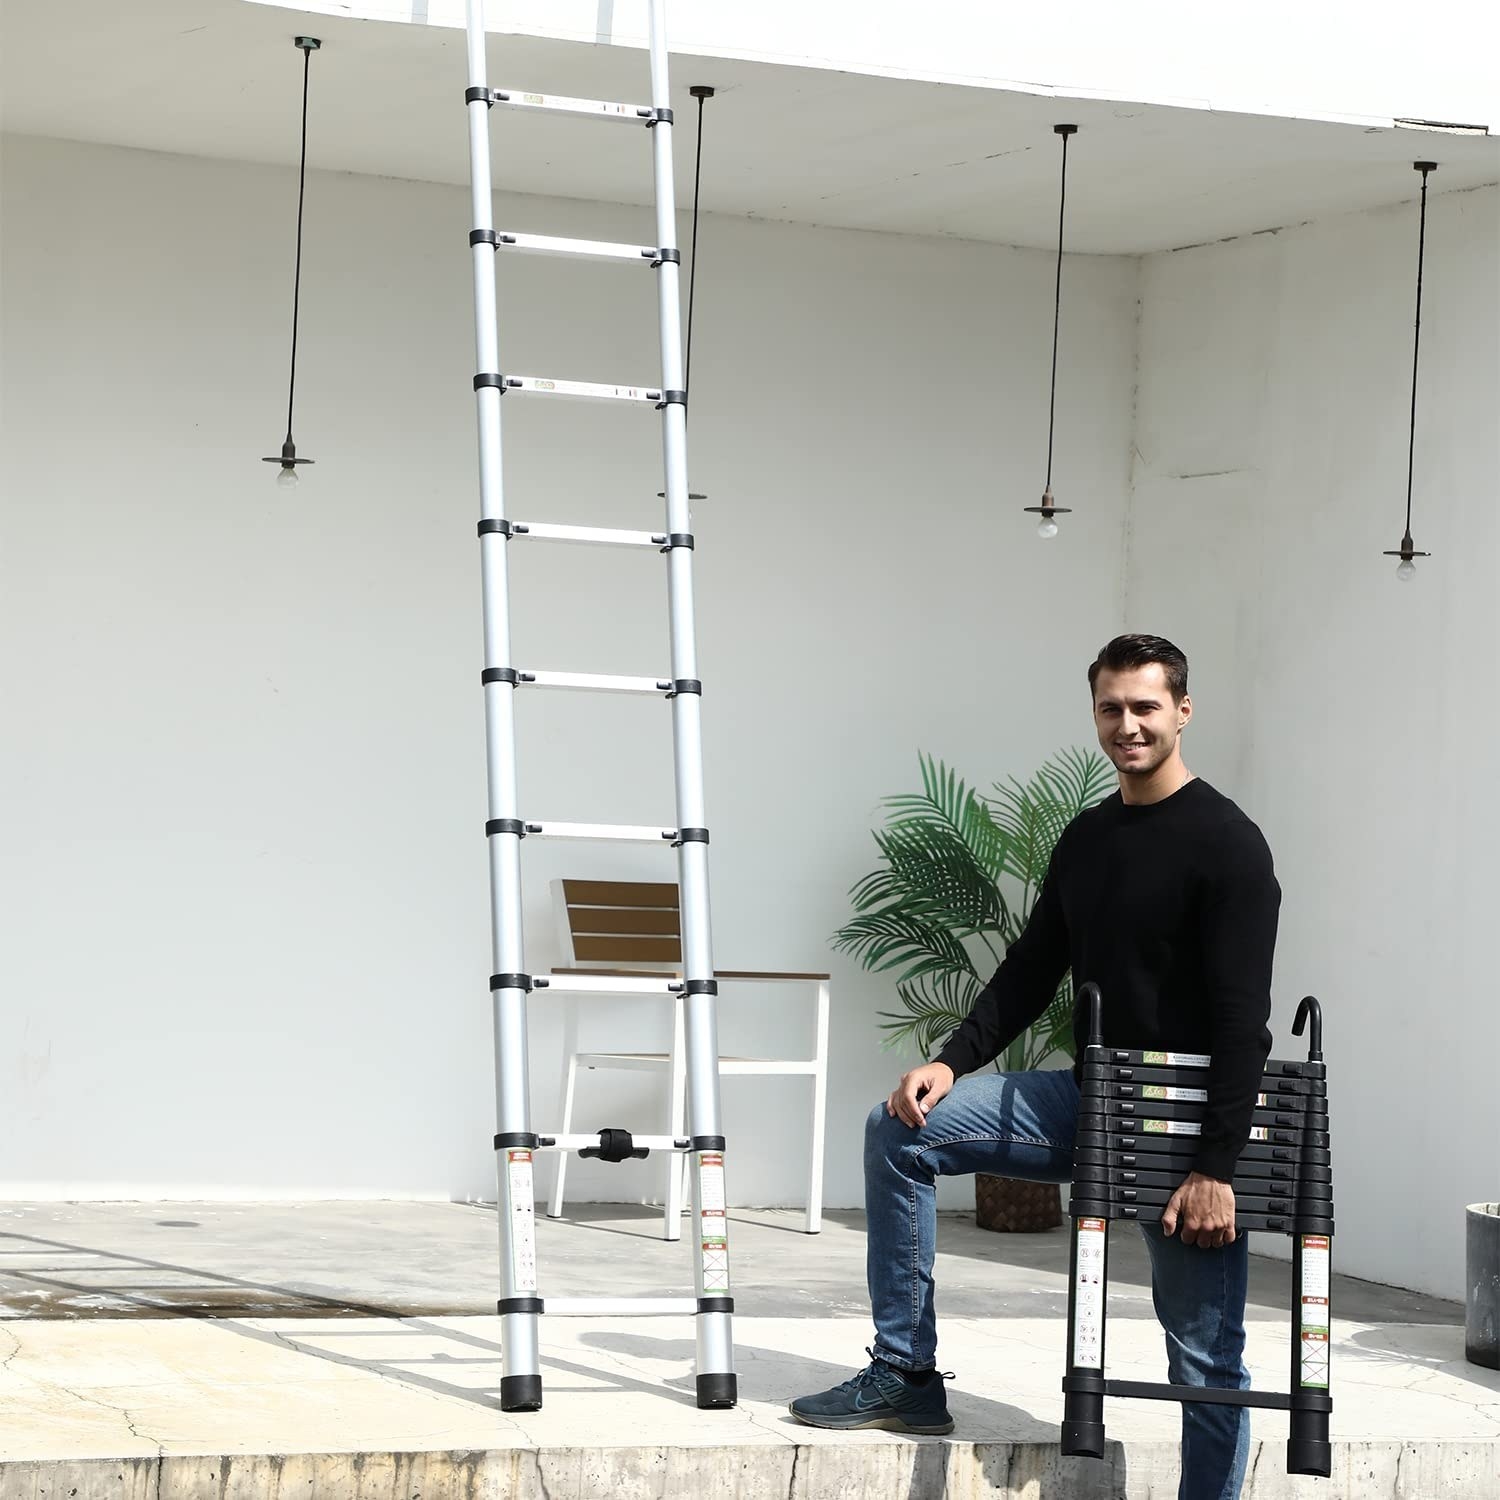 a smiling person standing next to the telescoping ladder while holding up a folded down one in their arms